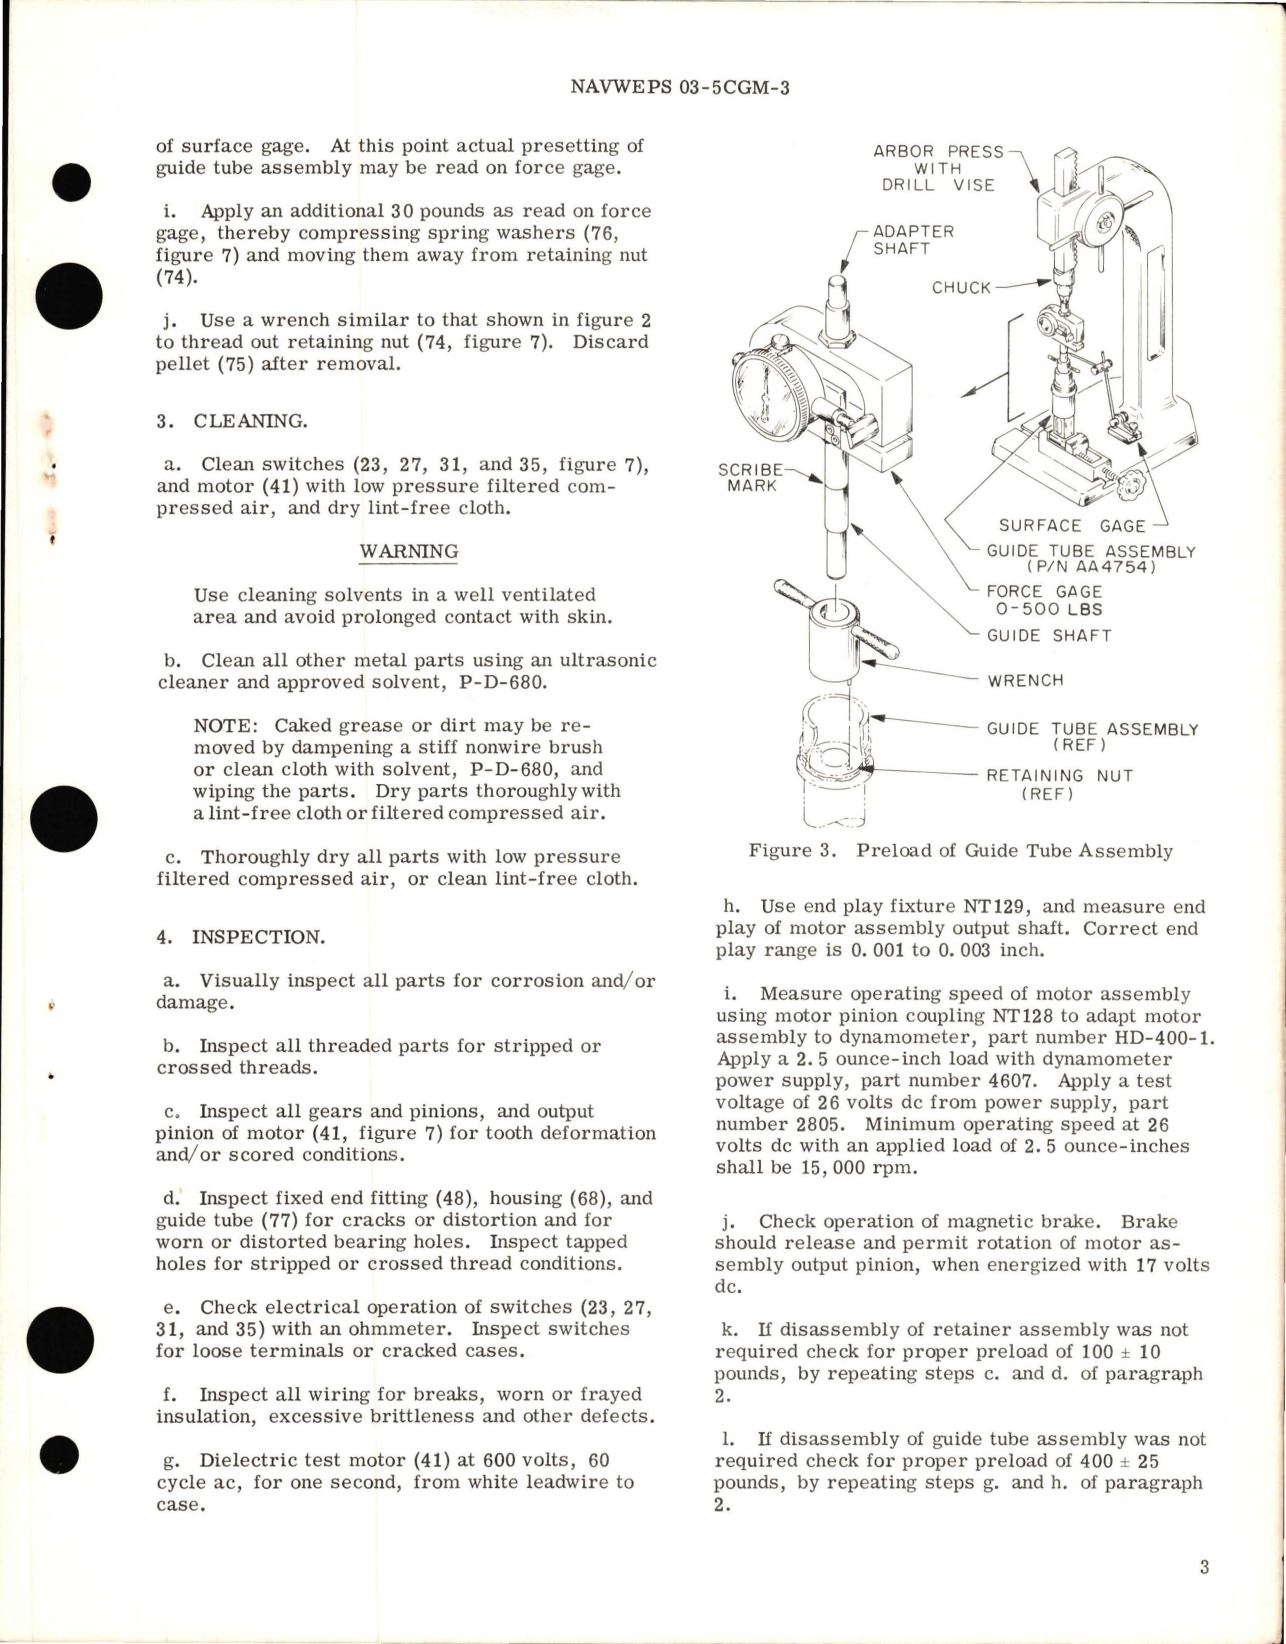 Sample page 5 from AirCorps Library document: Overhaul with Illustrated Parts Breakdown for Linear Actuator - Model DL300M2 